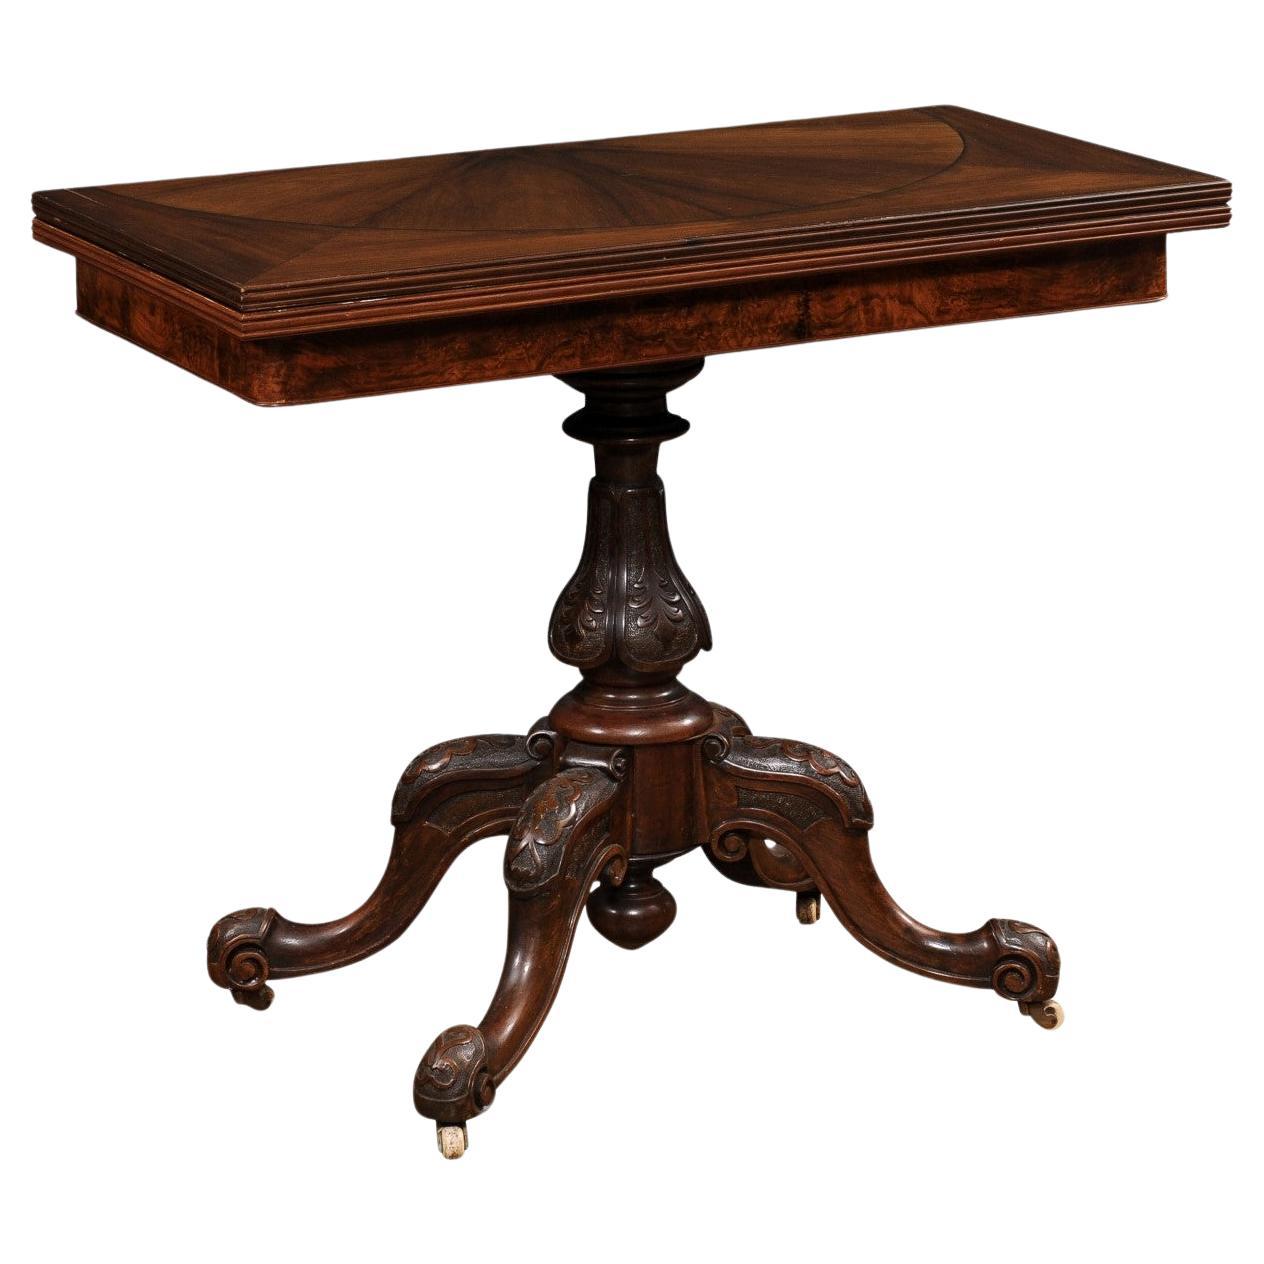 Victorian English Walnut and Mahogany Fold-Over Game Table with Bookmatched Top For Sale